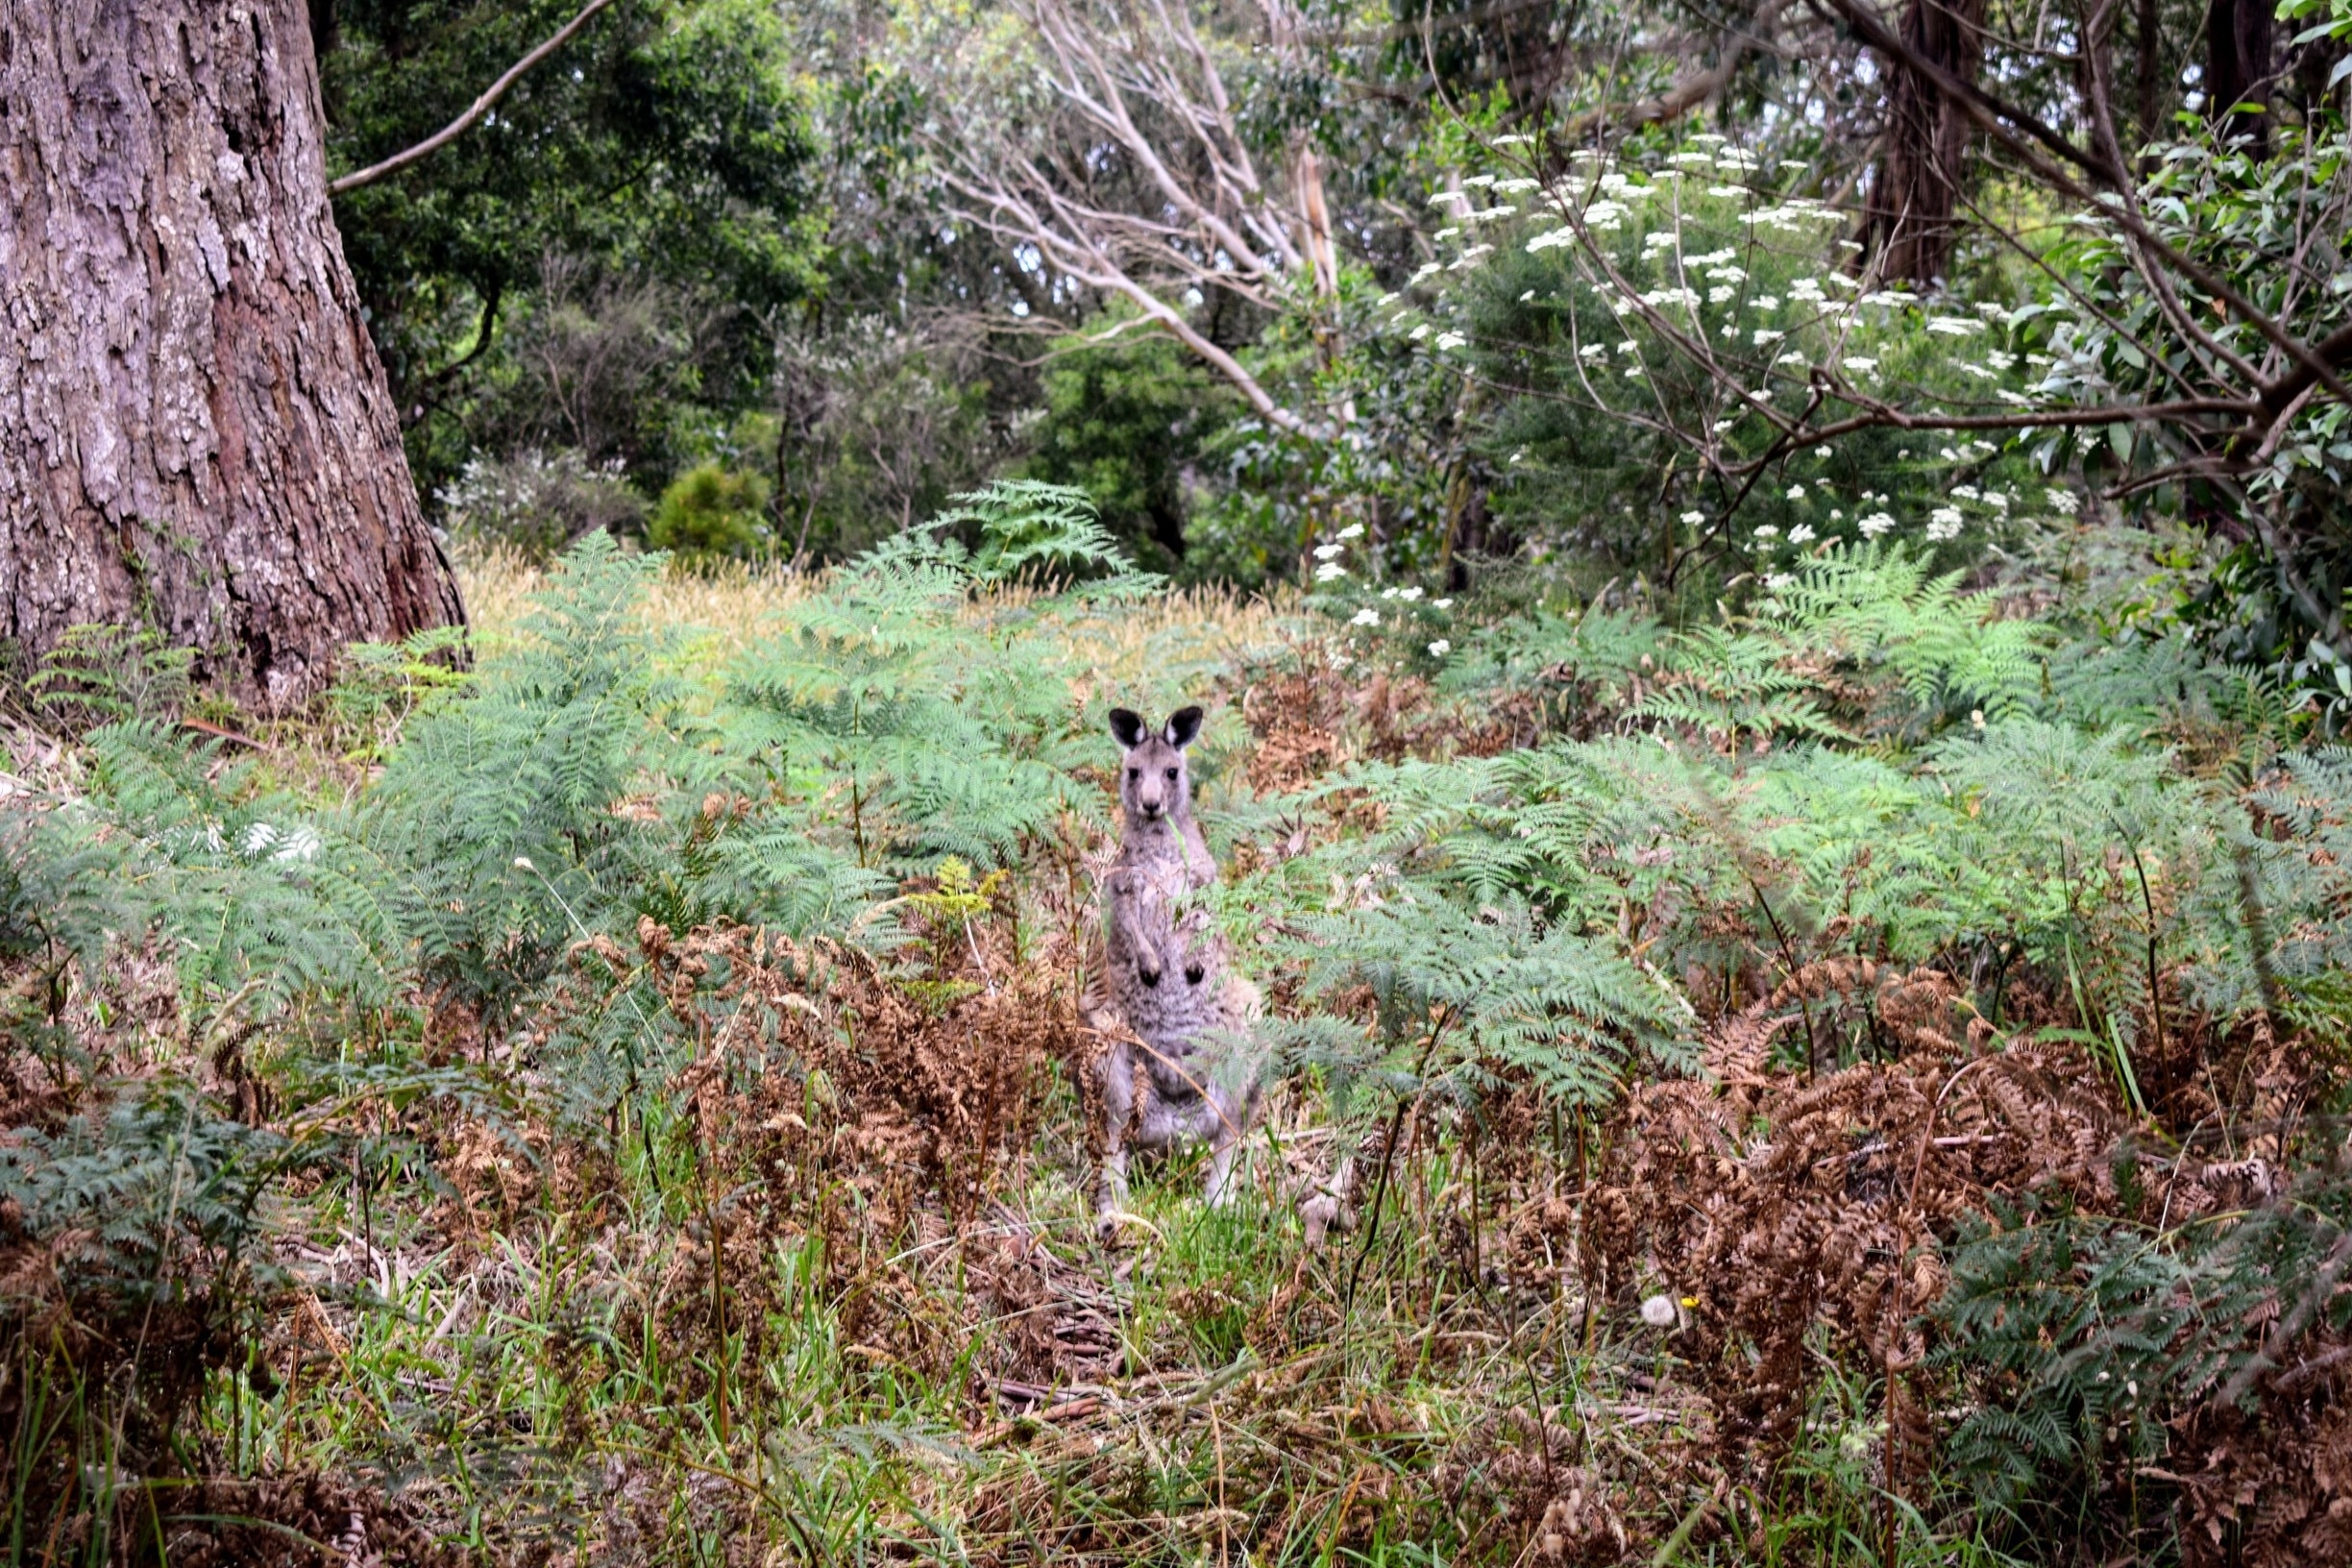 Stumbled upon this little roo in Arthur's Seat State Park on the Mornington Peninsula last week. He just might be the cutest roo I've seen yet... Almost like he was posing for my camera. #kangaroo #wildlife #australia #morningtonpeninsula #victoriaaustralia